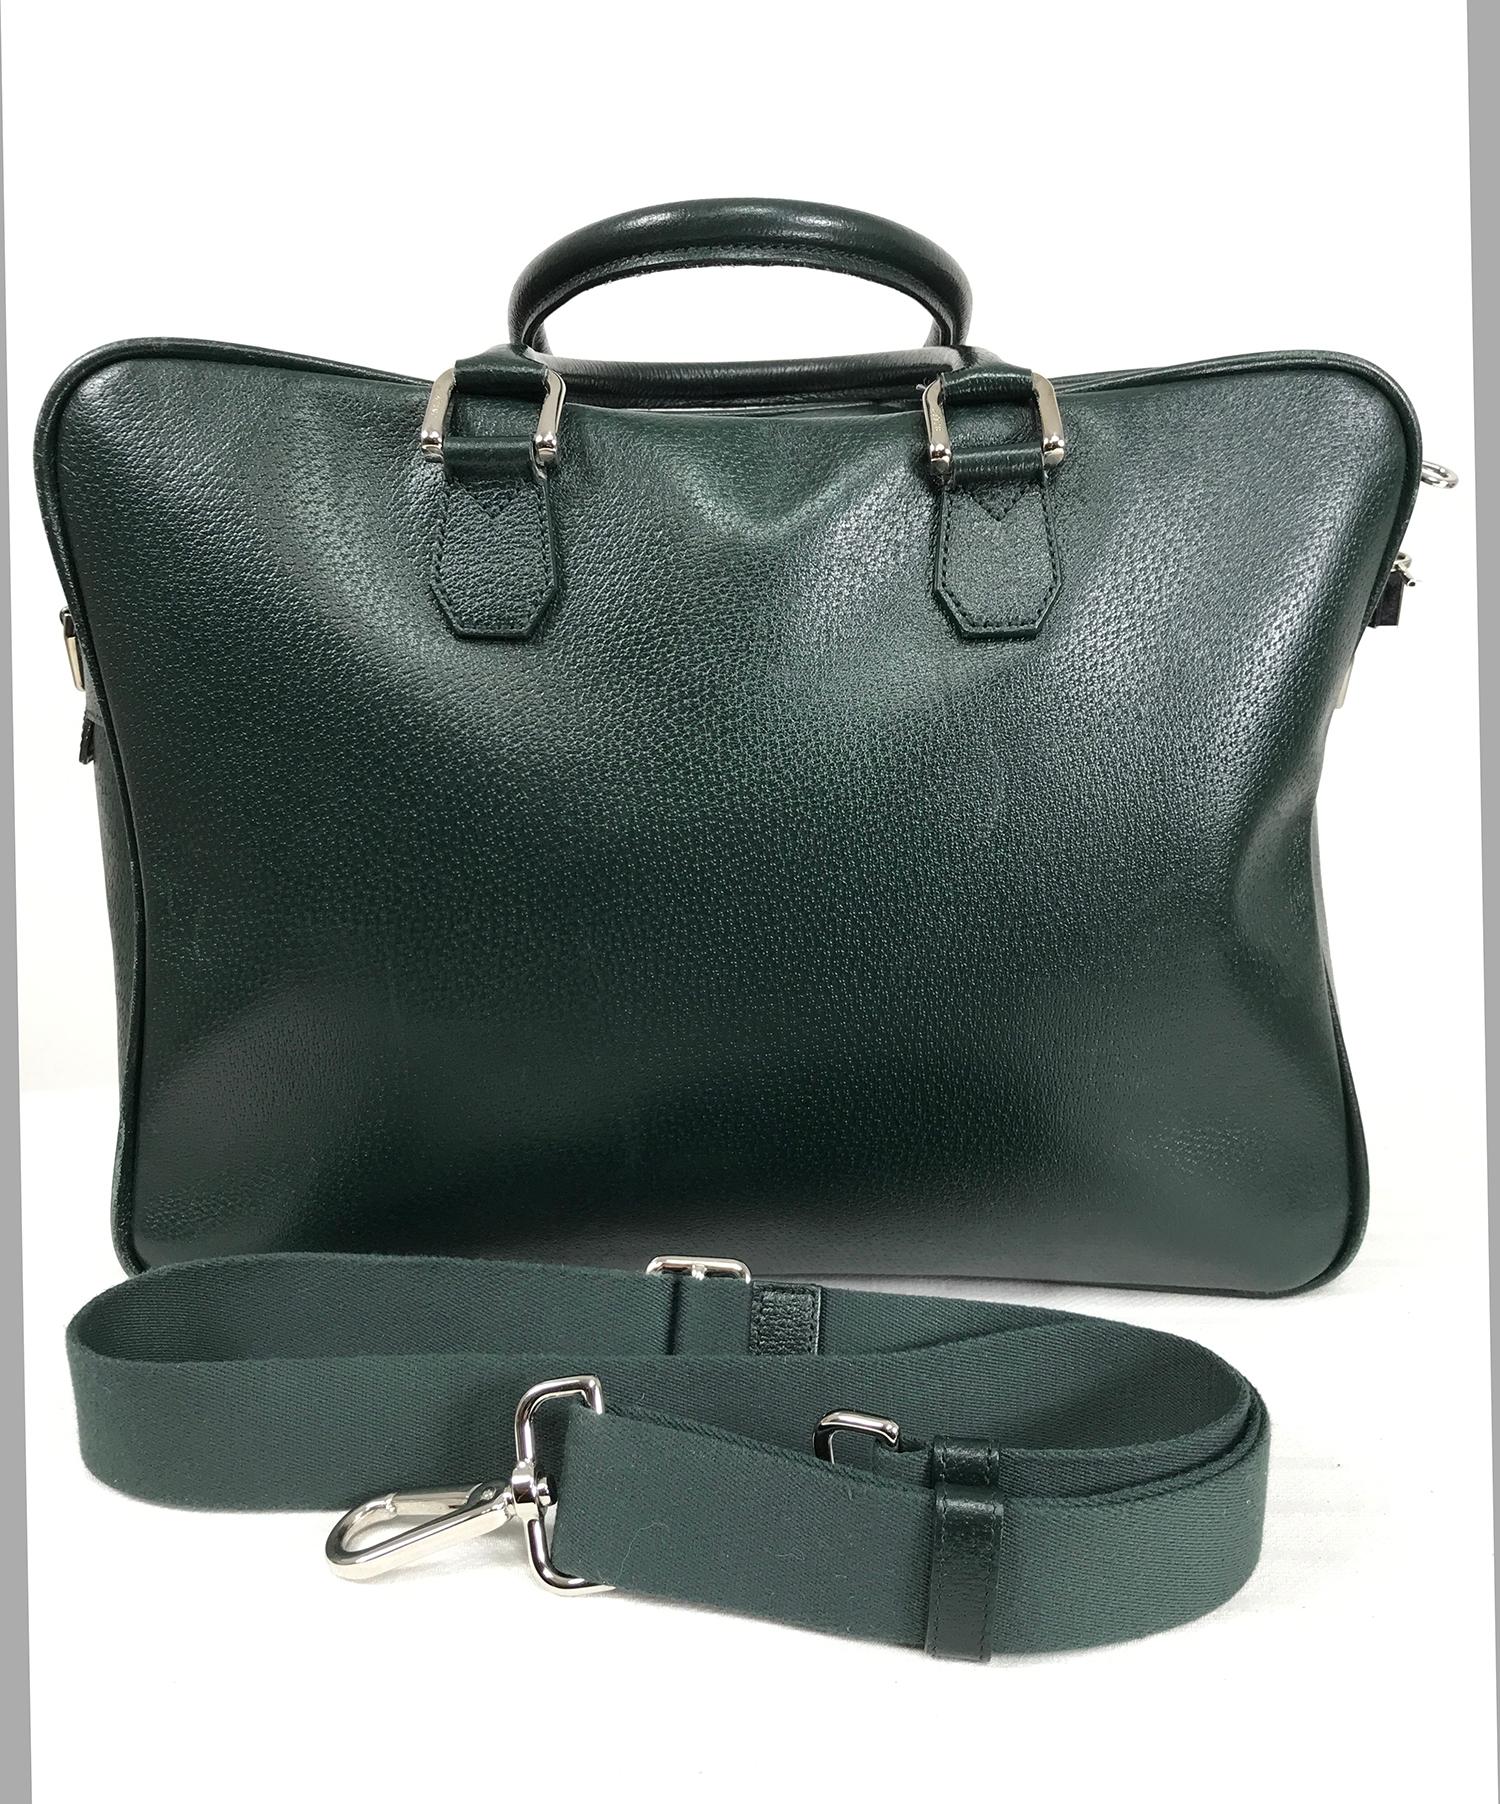 Bally forest green pigskin leather carry on, business bag with removable shoulder strap. Beautiful bag is soft leather, double handles, chrome hardware, logo lock and keys. Zipper outside front compartment. Quilted green lining protects laptop.